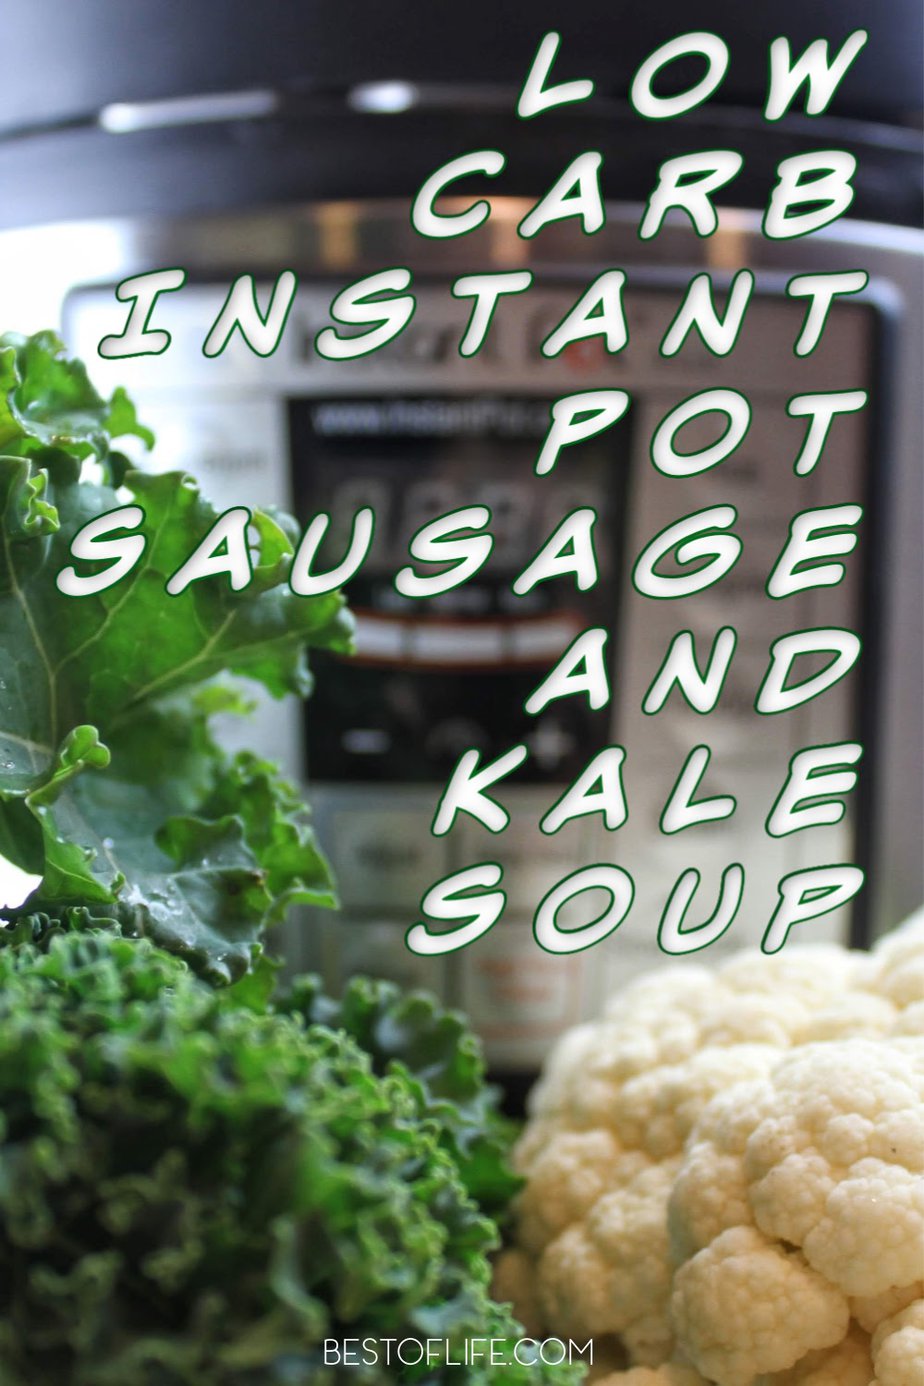 This Instant Pot creamy sausage and kale soup is perfect for family meals and you can easily scale the recipe for a delicious party food. Low Carb Recipes | Healthy Instant Pot Soup Recipes | Recipes with Kale | Instant Pot Dinner Recipes | Easy Instant Pot Recipes | Soup Dinner Recipes #Instant Pot #soup via @thebestoflife